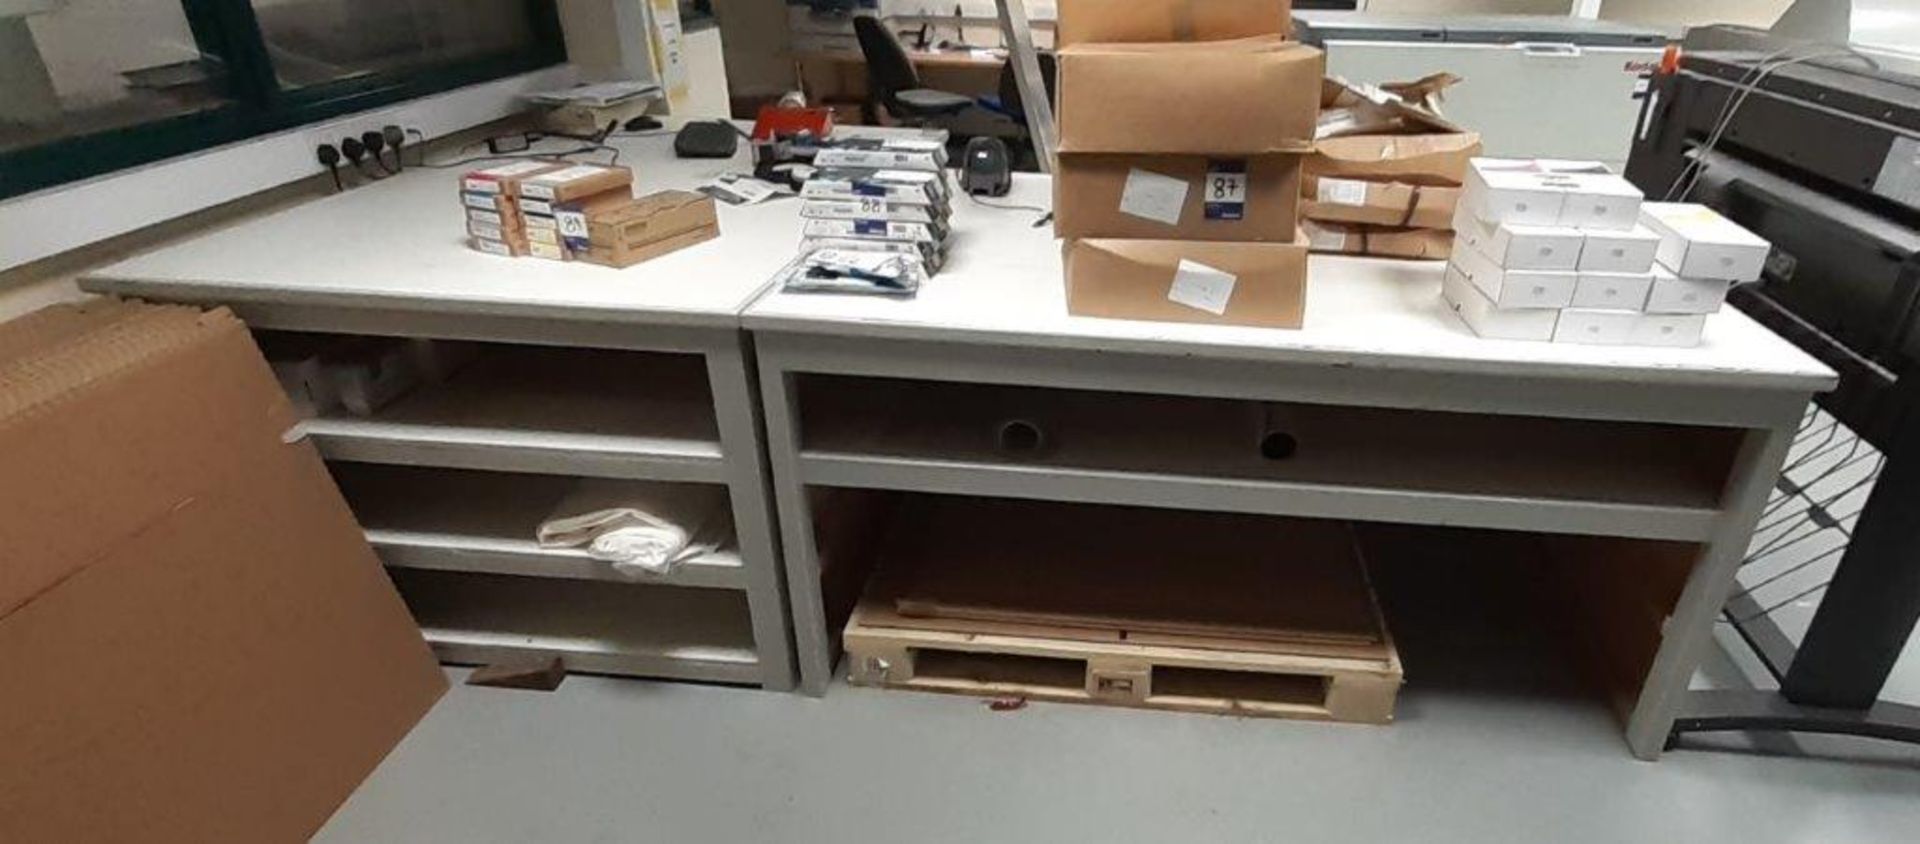 2x Work Benches with 3 undershelves (1870 x 1240) - Image 2 of 2